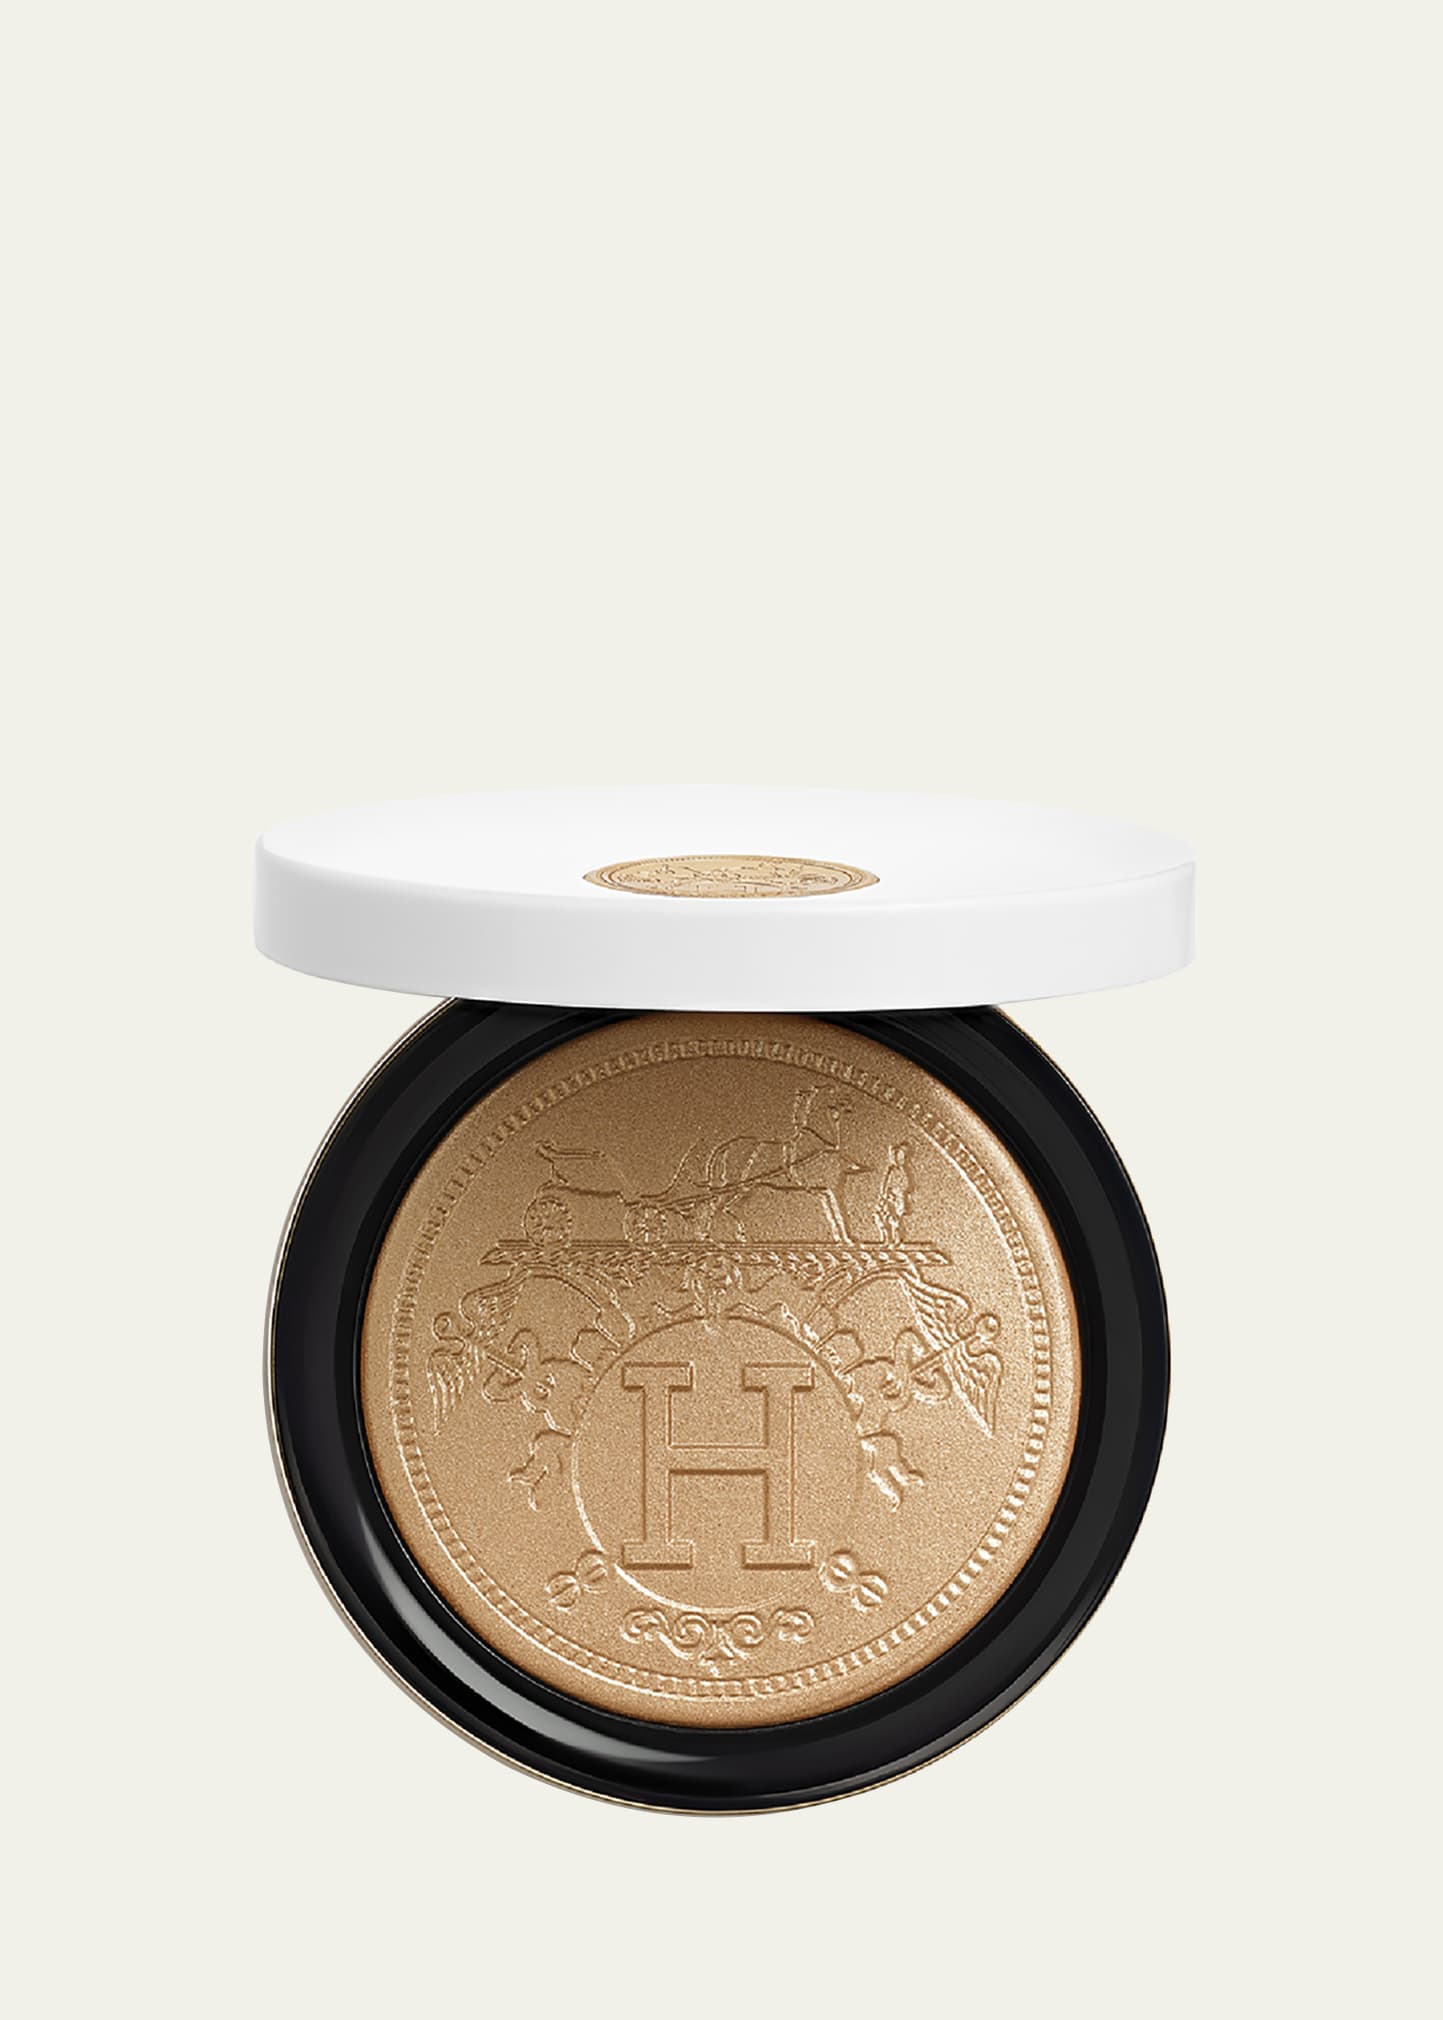 Herm&egrave;s Poudre d'Orfevre Face and Eye Illuminating Powder, Limited Edition